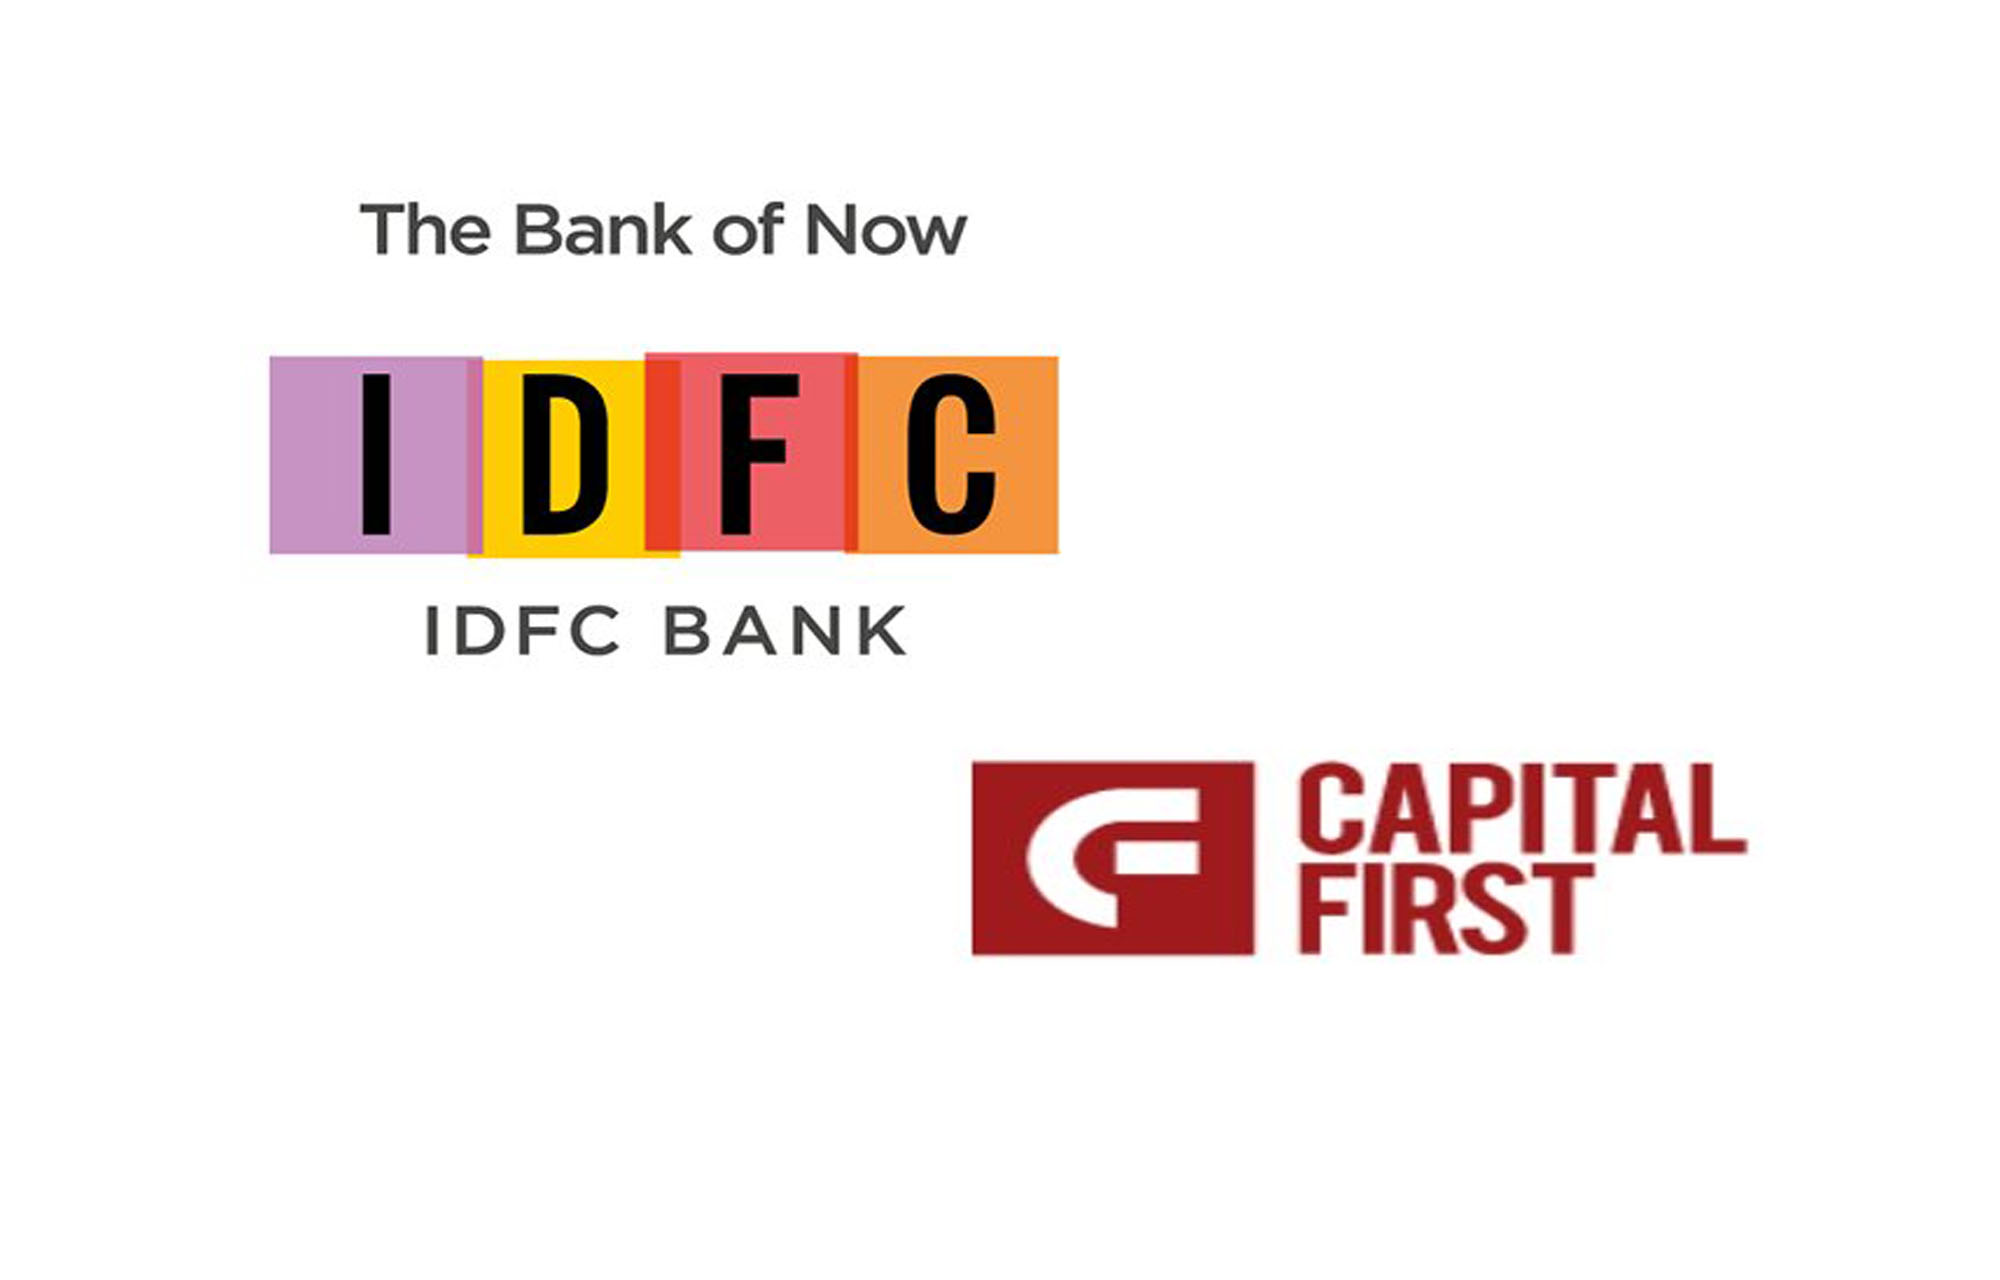 Idfc Bank And Capital First Merged To Be Known As Idfc First Bank Idfc Bank Shares Up 0 83 At Bse Biznext India